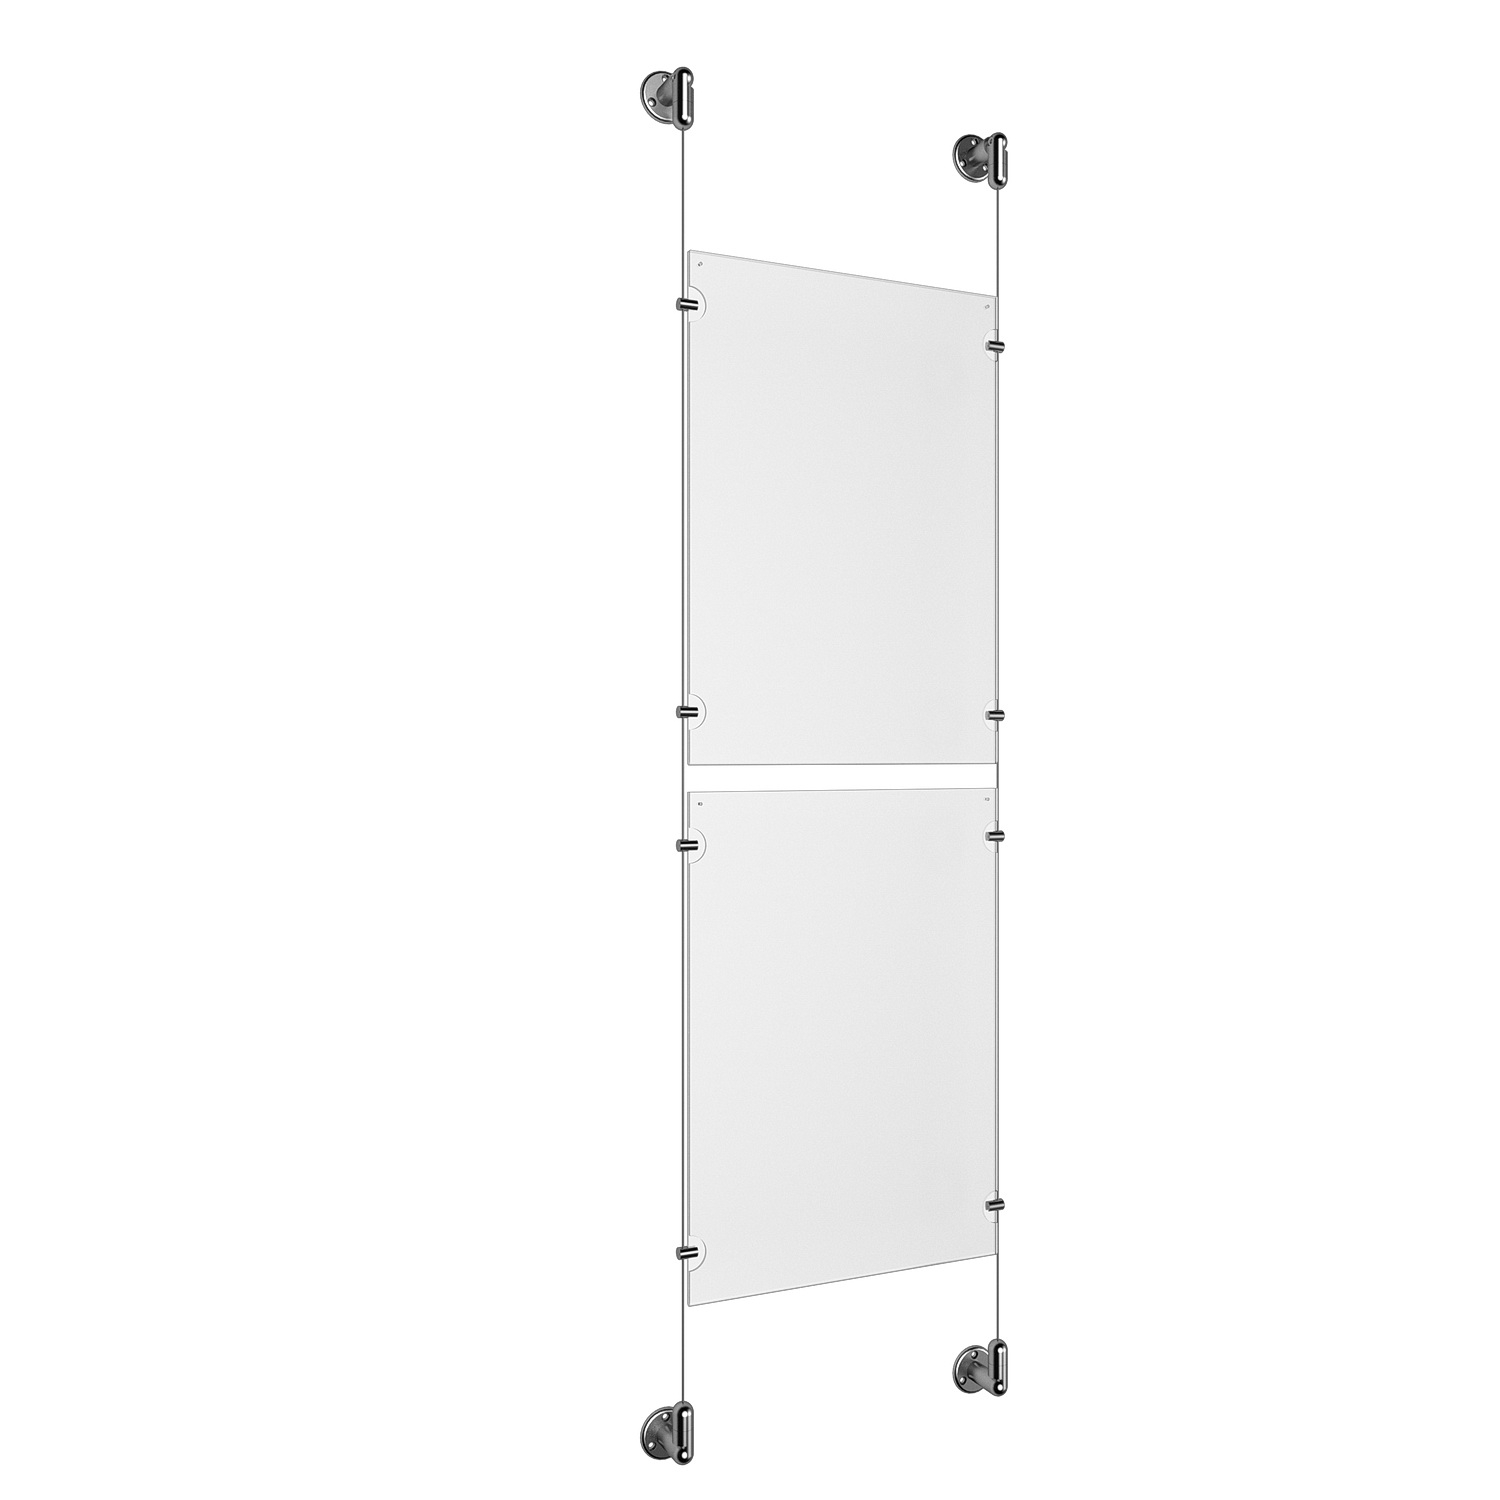 (2) 11'' Width x 17'' Height Clear Acrylic Frame & (2) Aluminum Clear Anodized Adjustable Angle Cable Systems with (8) Single-Sided Panel Grippers